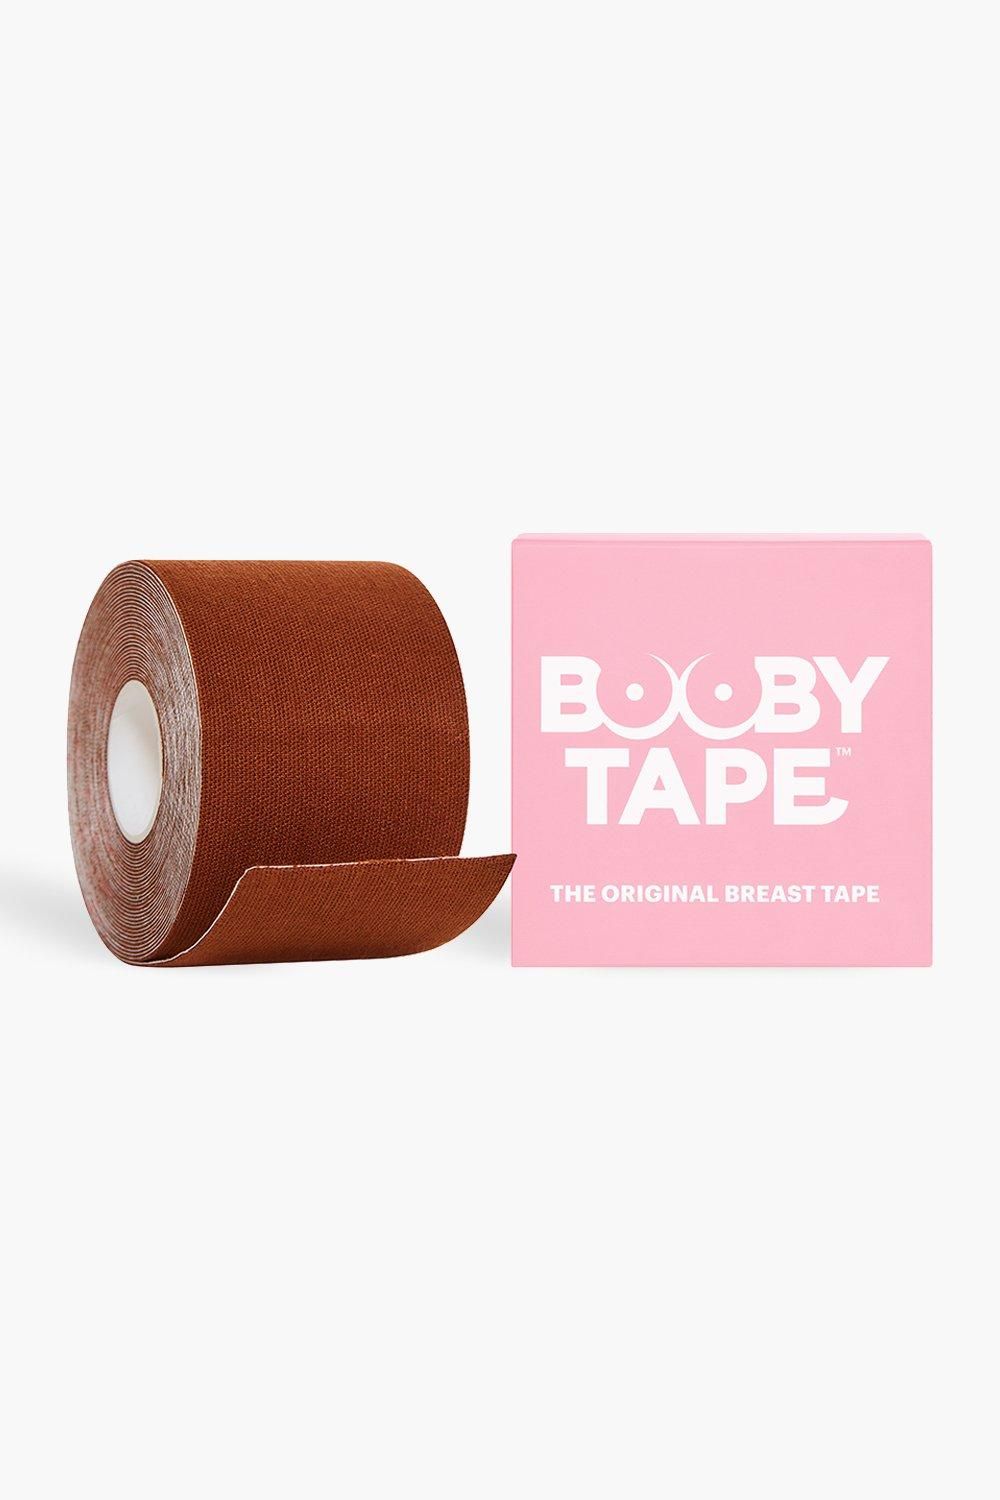 Booby Tape Brown 5m Roll | Boohoo.com (UK & IE)